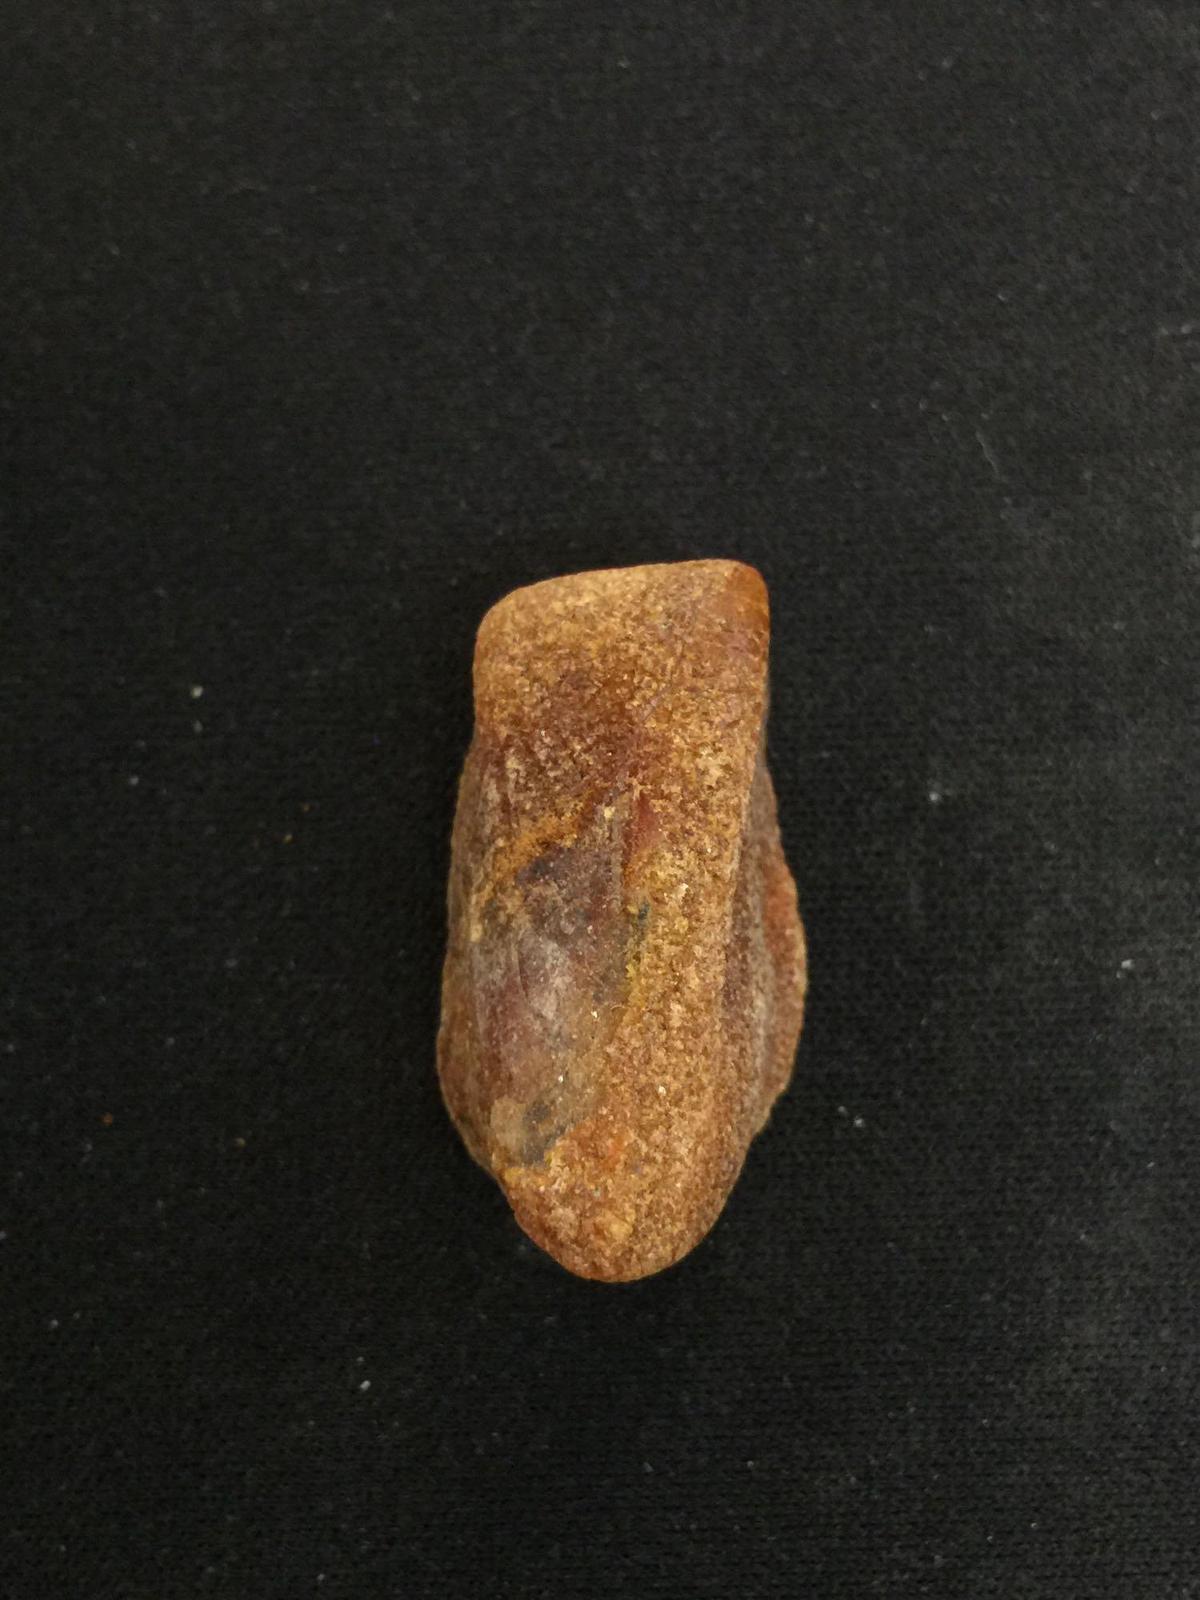 Unsearched & Unpolished Baltic Amber Piece - 4.2 grams